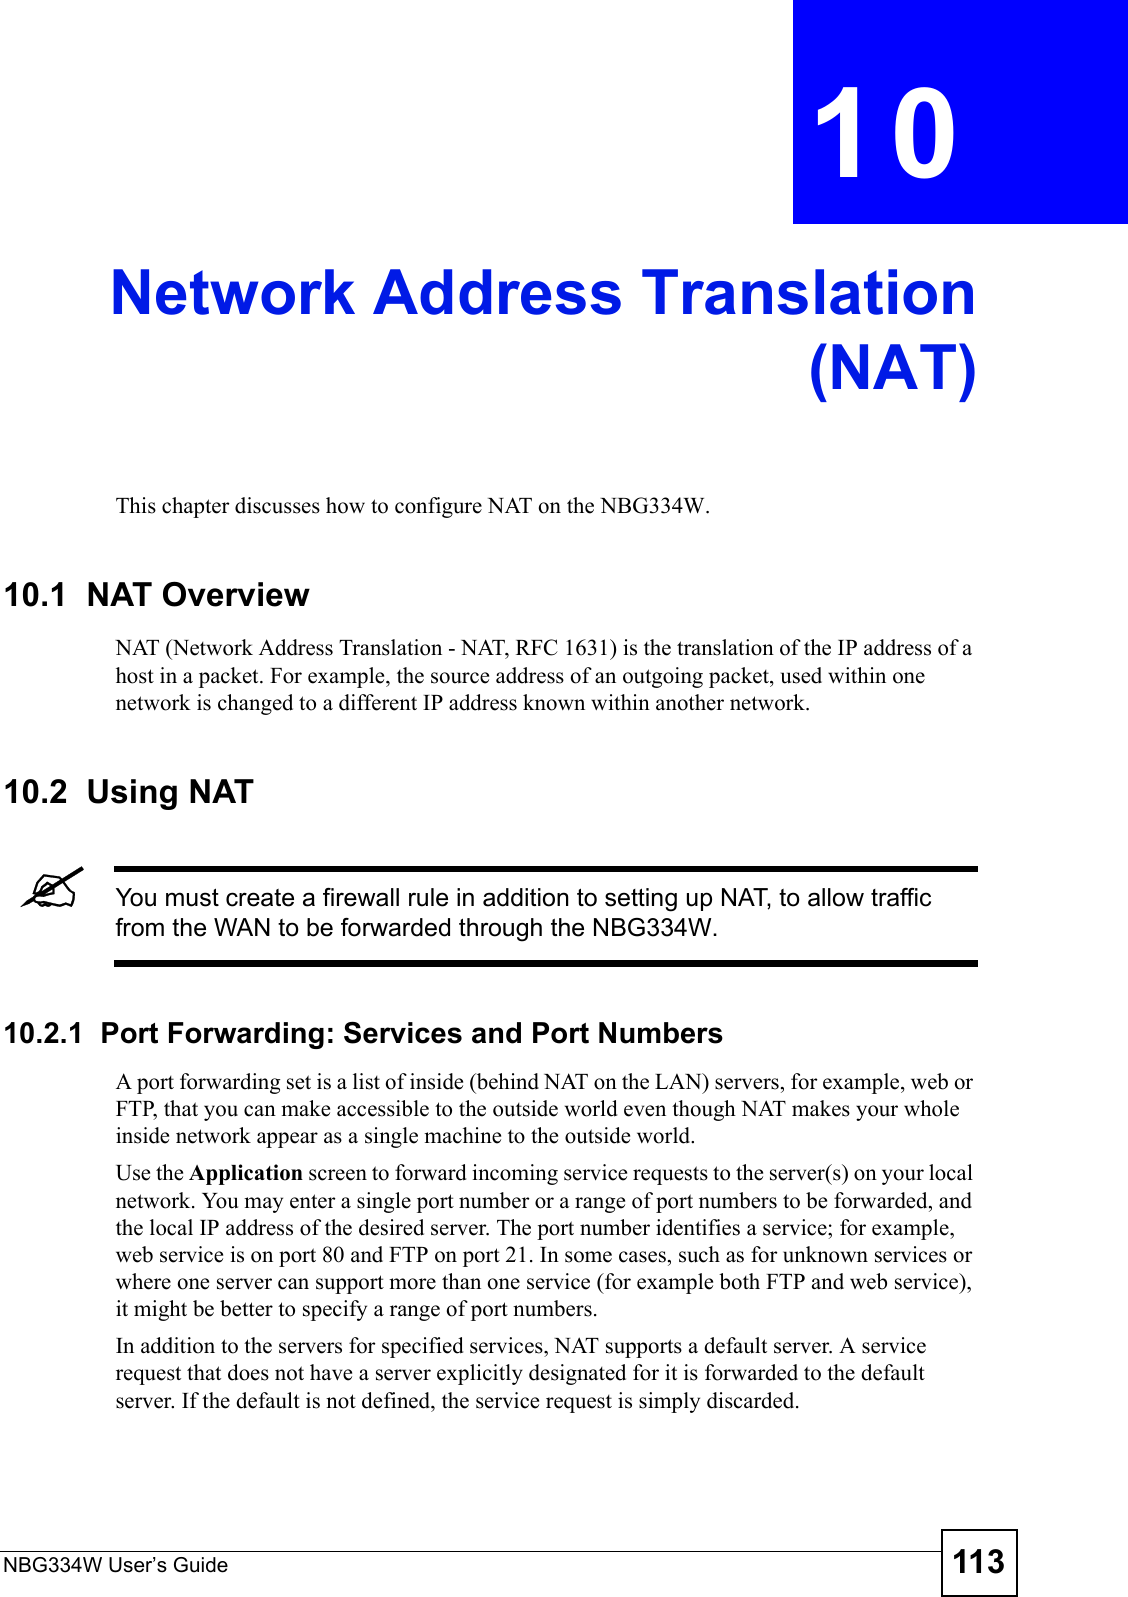 NBG334W User’s Guide 113CHAPTER  10 Network Address Translation(NAT)This chapter discusses how to configure NAT on the NBG334W.10.1  NAT Overview   NAT (Network Address Translation - NAT, RFC 1631) is the translation of the IP address of a host in a packet. For example, the source address of an outgoing packet, used within one network is changed to a different IP address known within another network.10.2  Using NAT&quot;You must create a firewall rule in addition to setting up NAT, to allow traffic from the WAN to be forwarded through the NBG334W.10.2.1  Port Forwarding: Services and Port NumbersA port forwarding set is a list of inside (behind NAT on the LAN) servers, for example, web or FTP, that you can make accessible to the outside world even though NAT makes your whole inside network appear as a single machine to the outside world. Use the Application screen to forward incoming service requests to the server(s) on your local network. You may enter a single port number or a range of port numbers to be forwarded, and the local IP address of the desired server. The port number identifies a service; for example, web service is on port 80 and FTP on port 21. In some cases, such as for unknown services or where one server can support more than one service (for example both FTP and web service), it might be better to specify a range of port numbers.In addition to the servers for specified services, NAT supports a default server. A service request that does not have a server explicitly designated for it is forwarded to the default server. If the default is not defined, the service request is simply discarded.